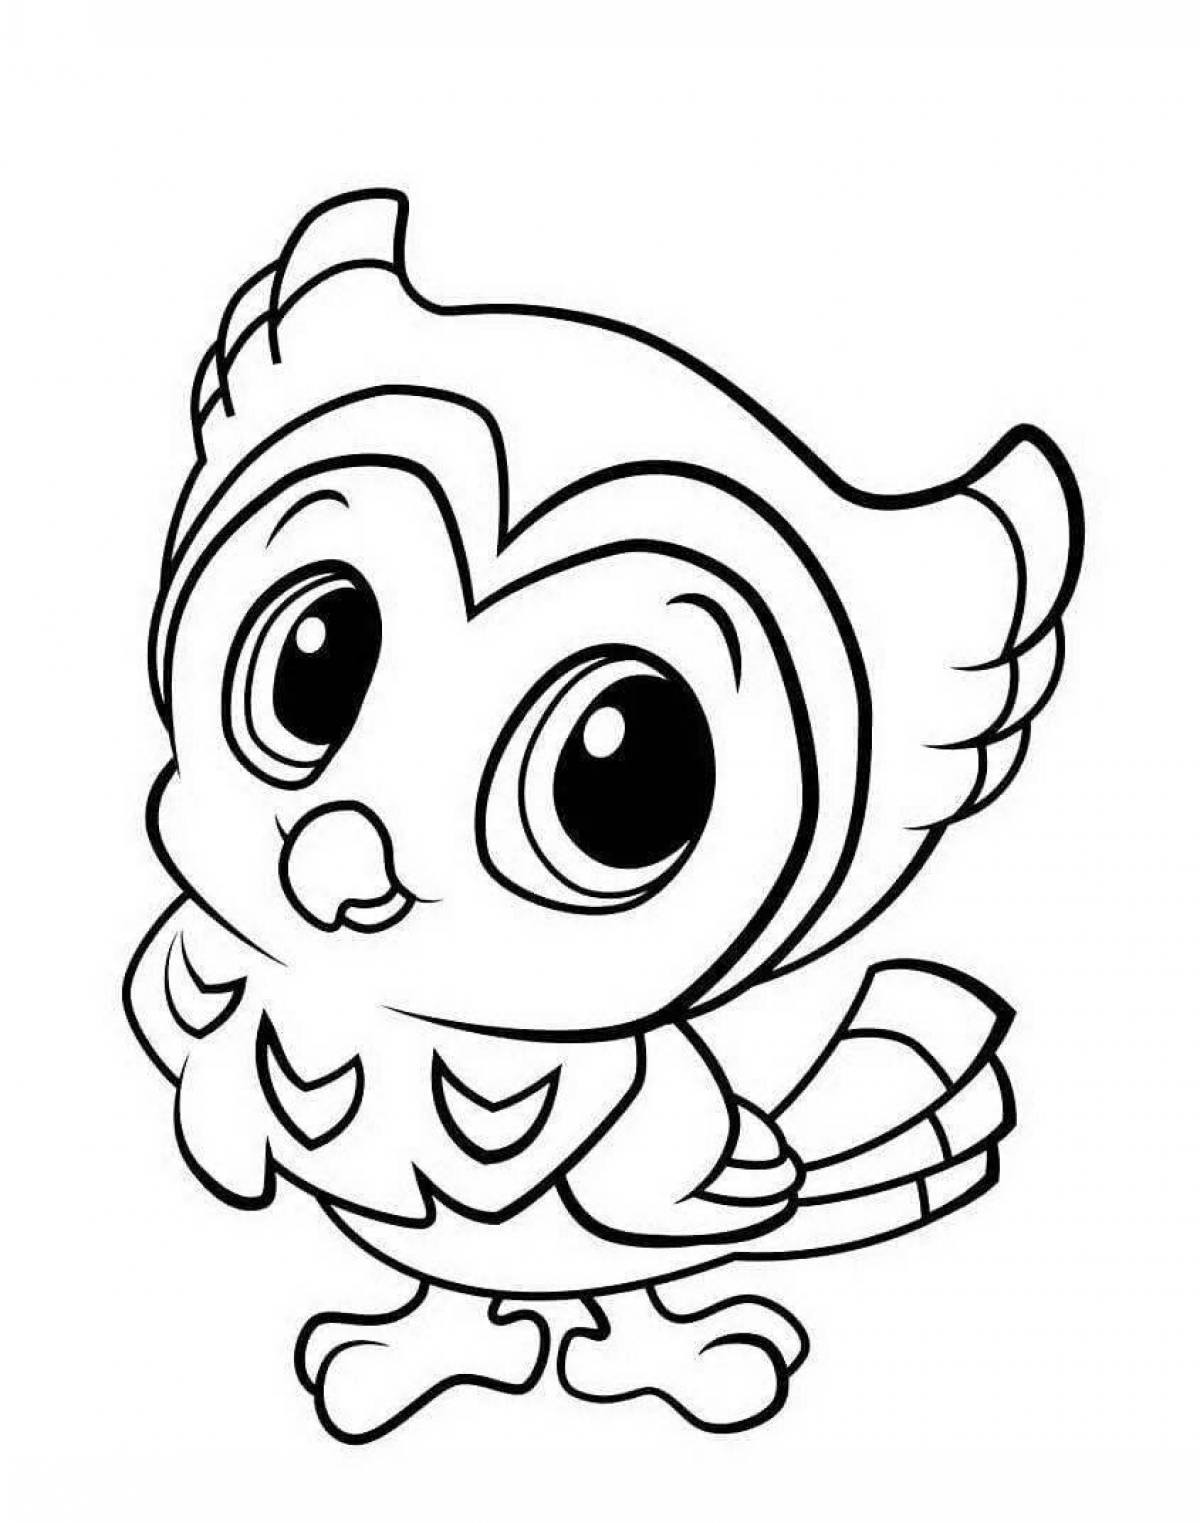 Adorable cute owl coloring page